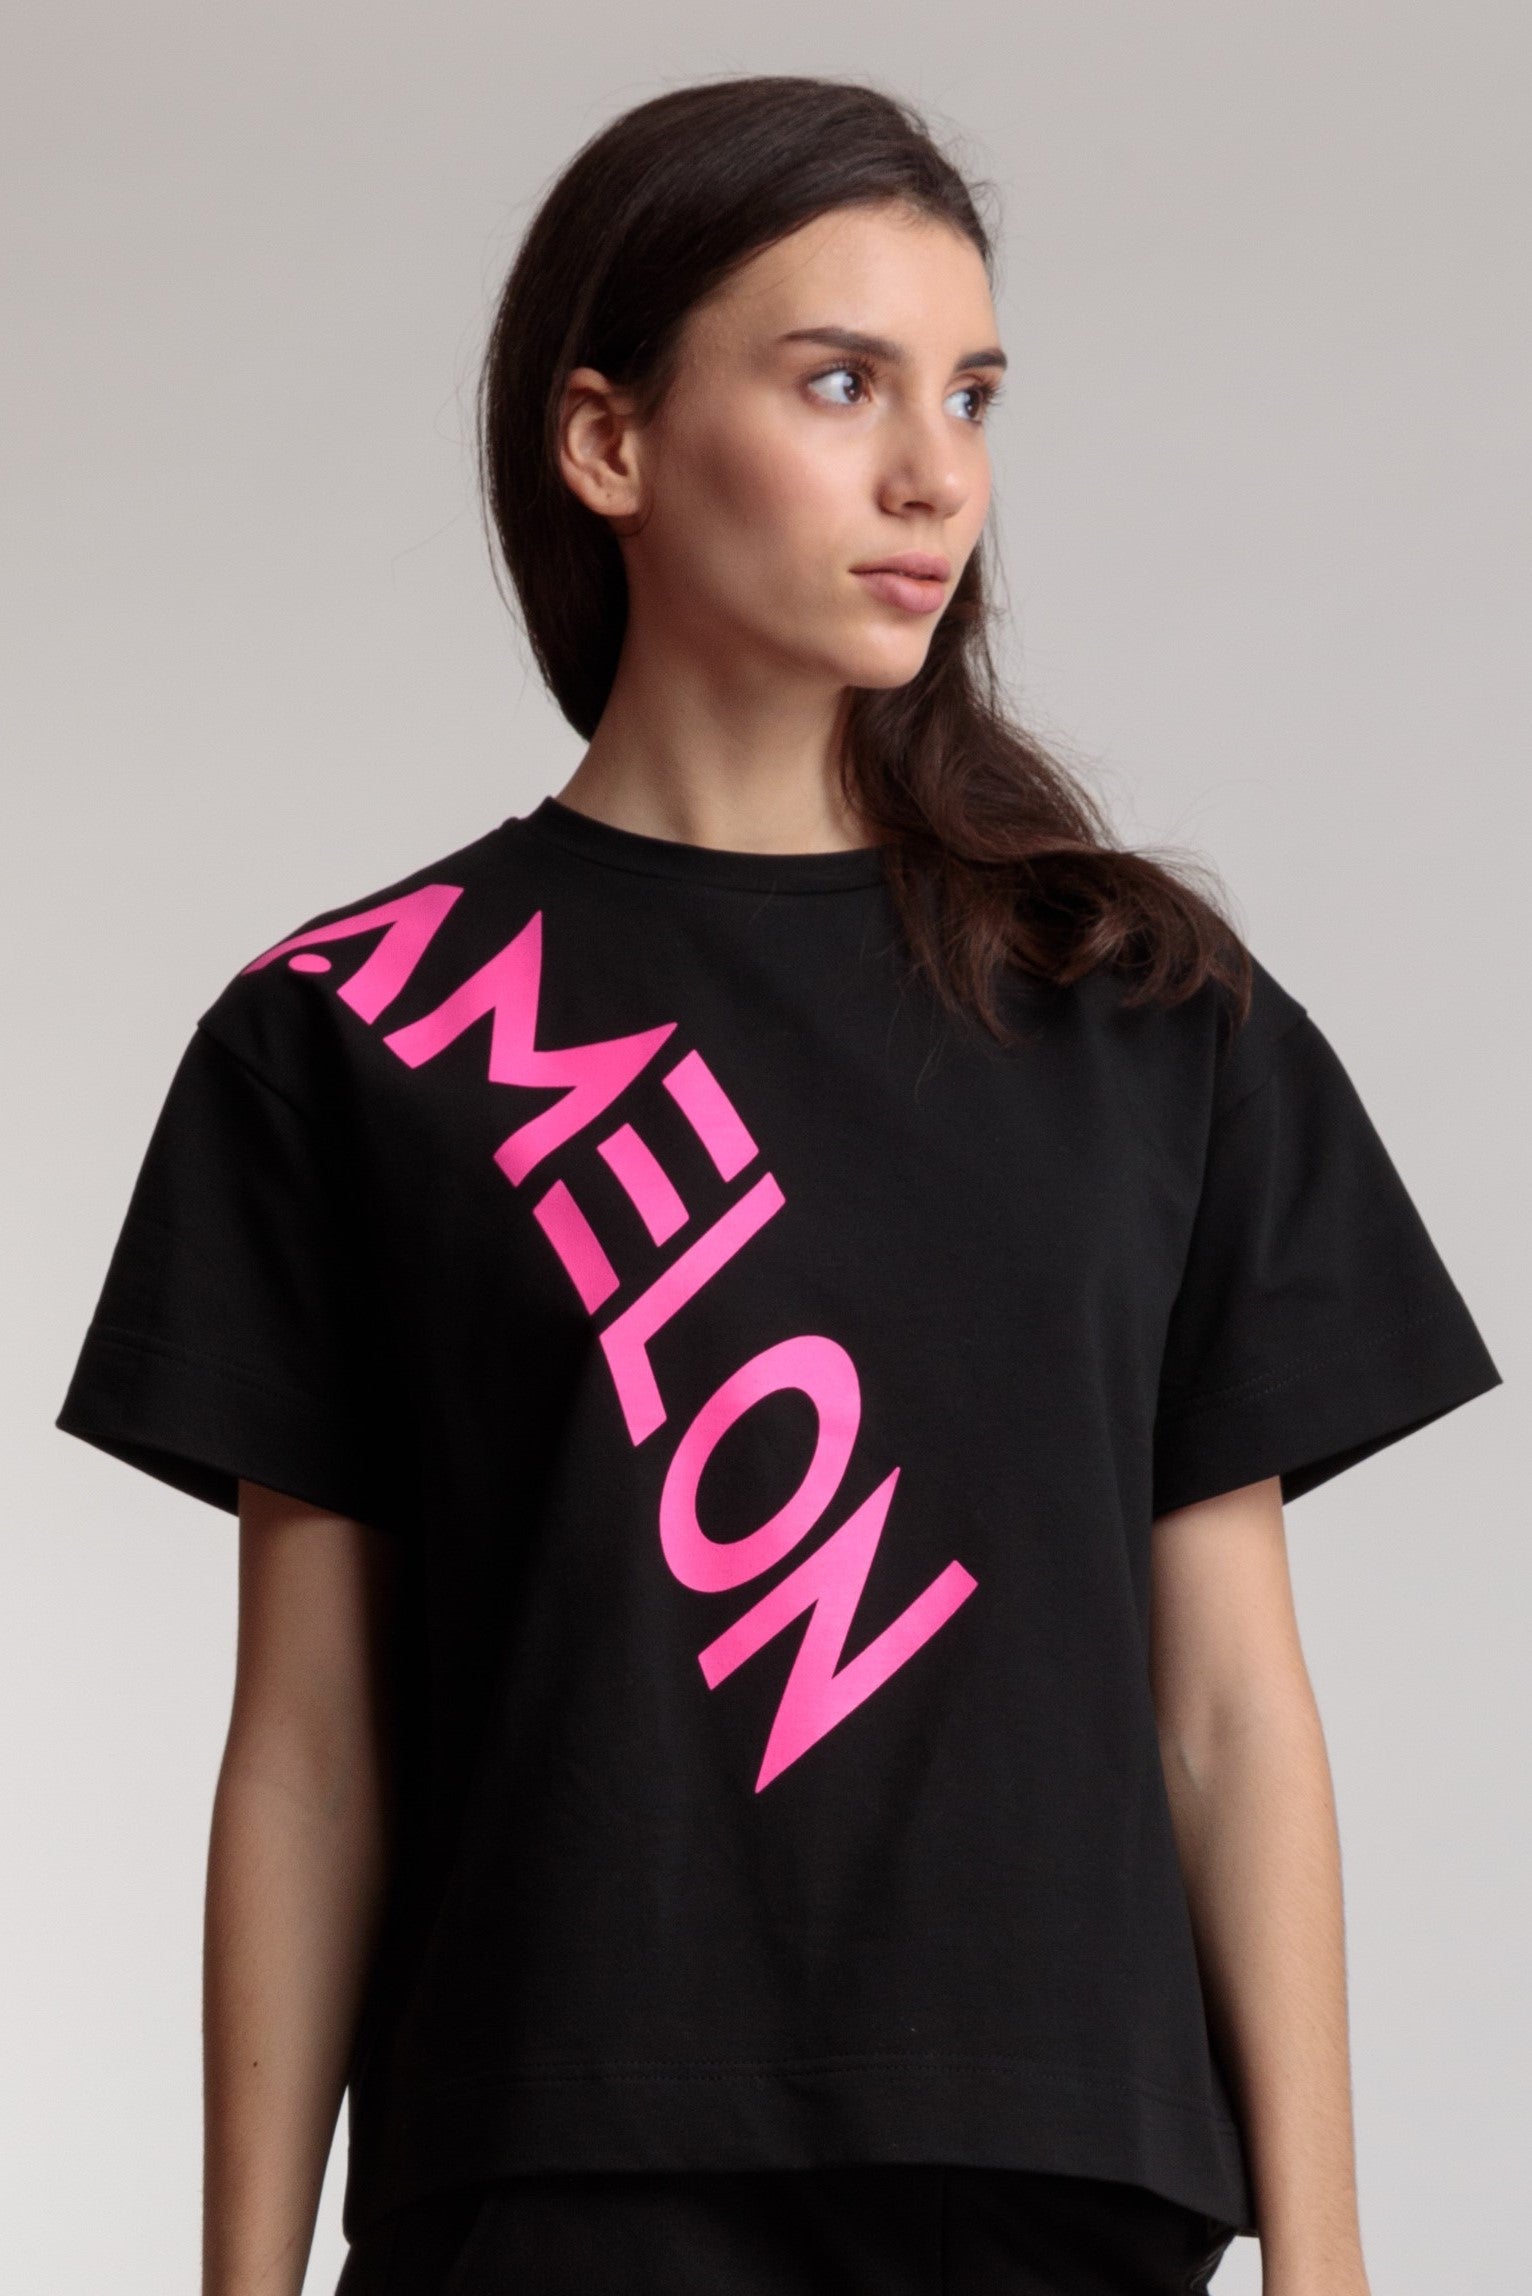 Women's straight black t-shirt with a large pink lettering